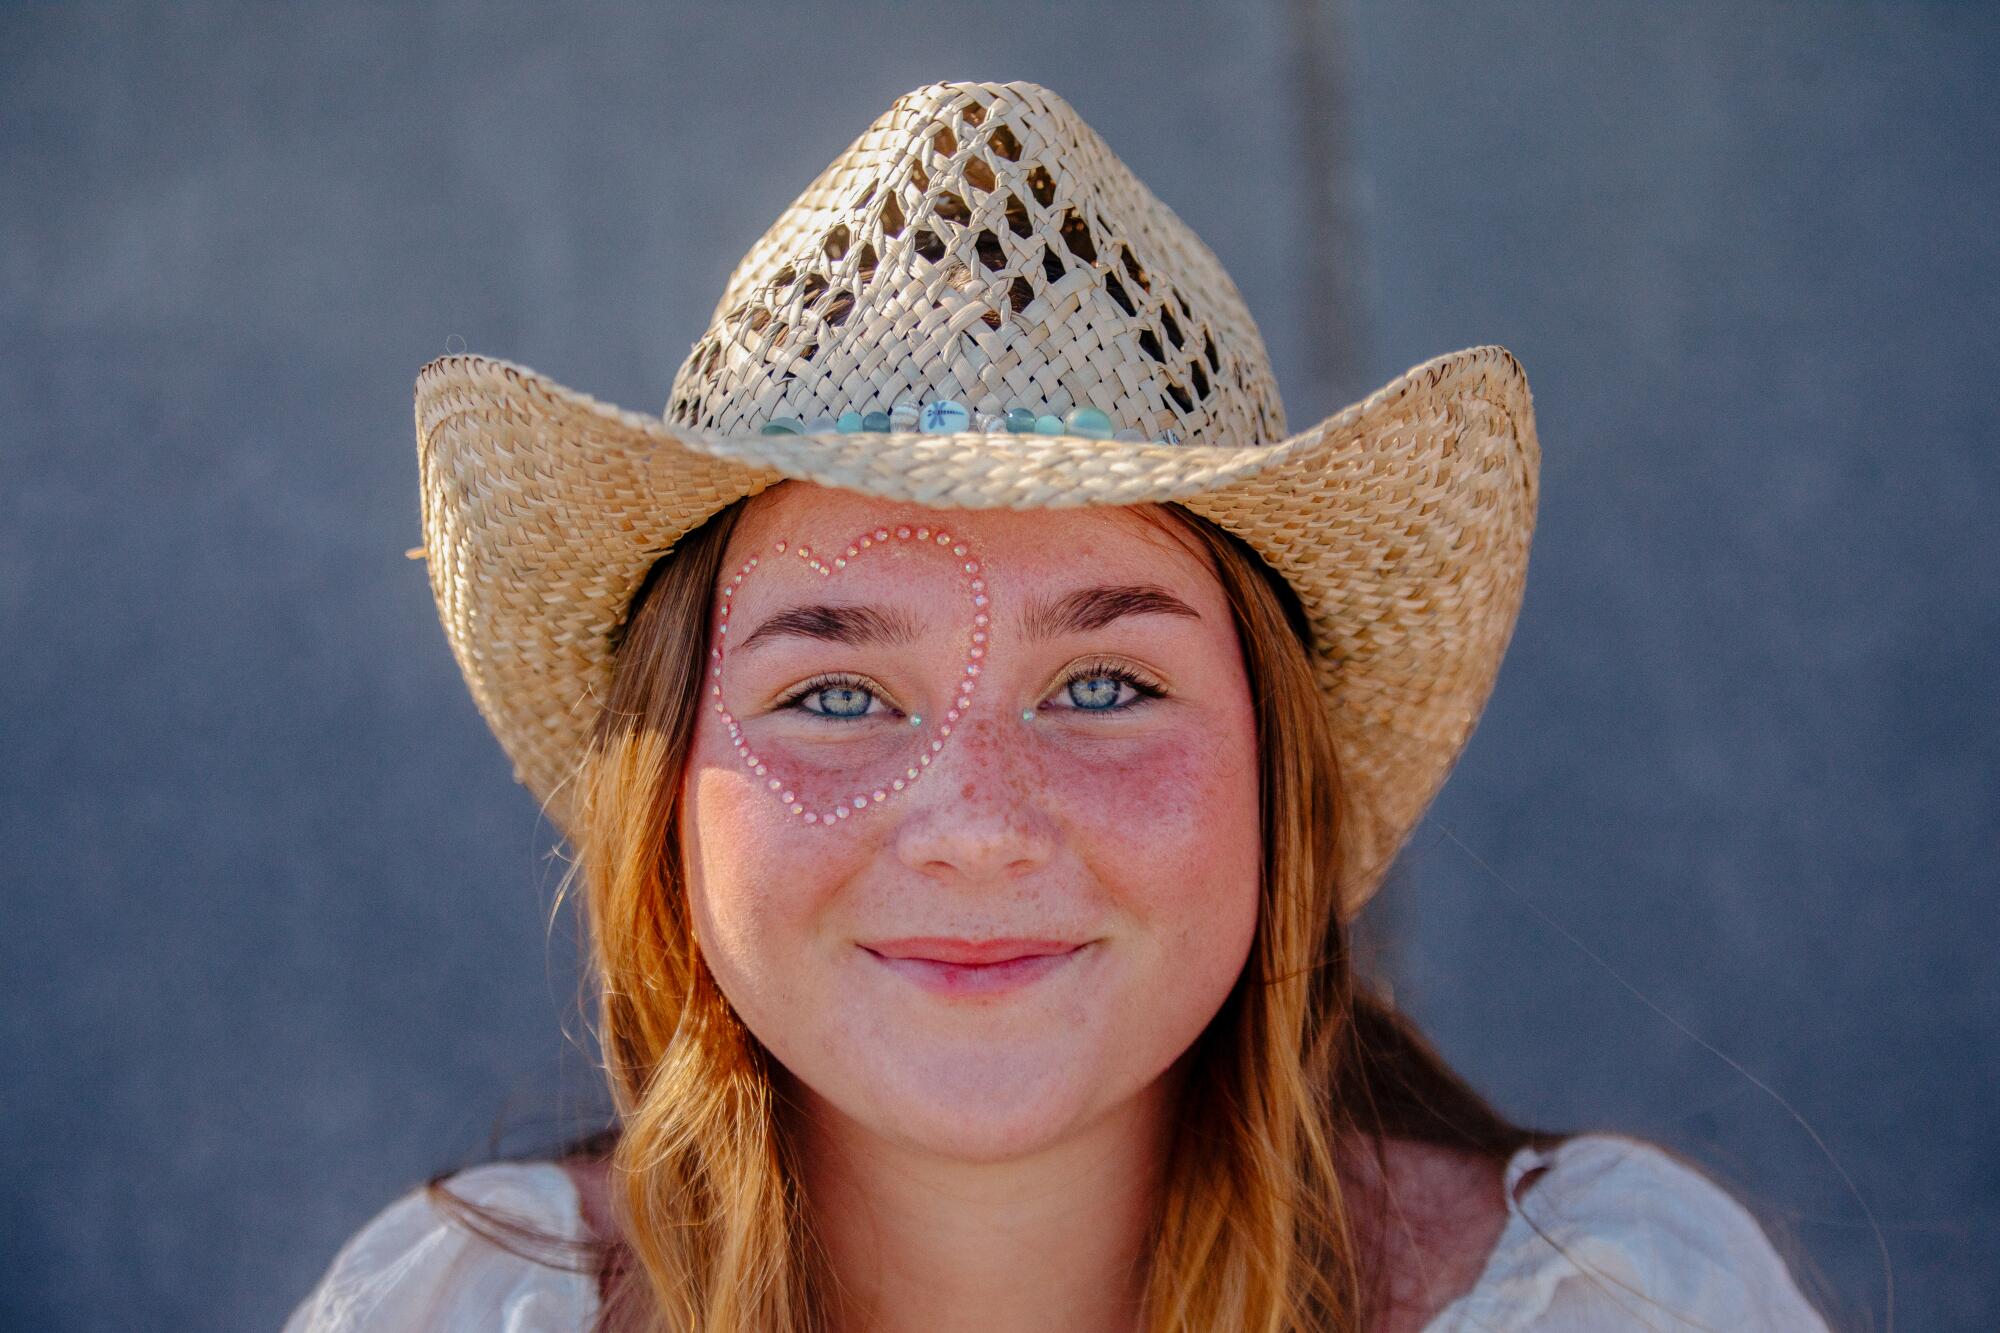 A portrait of a girl wearing a cowboy hat with a jewel heart around her eye.